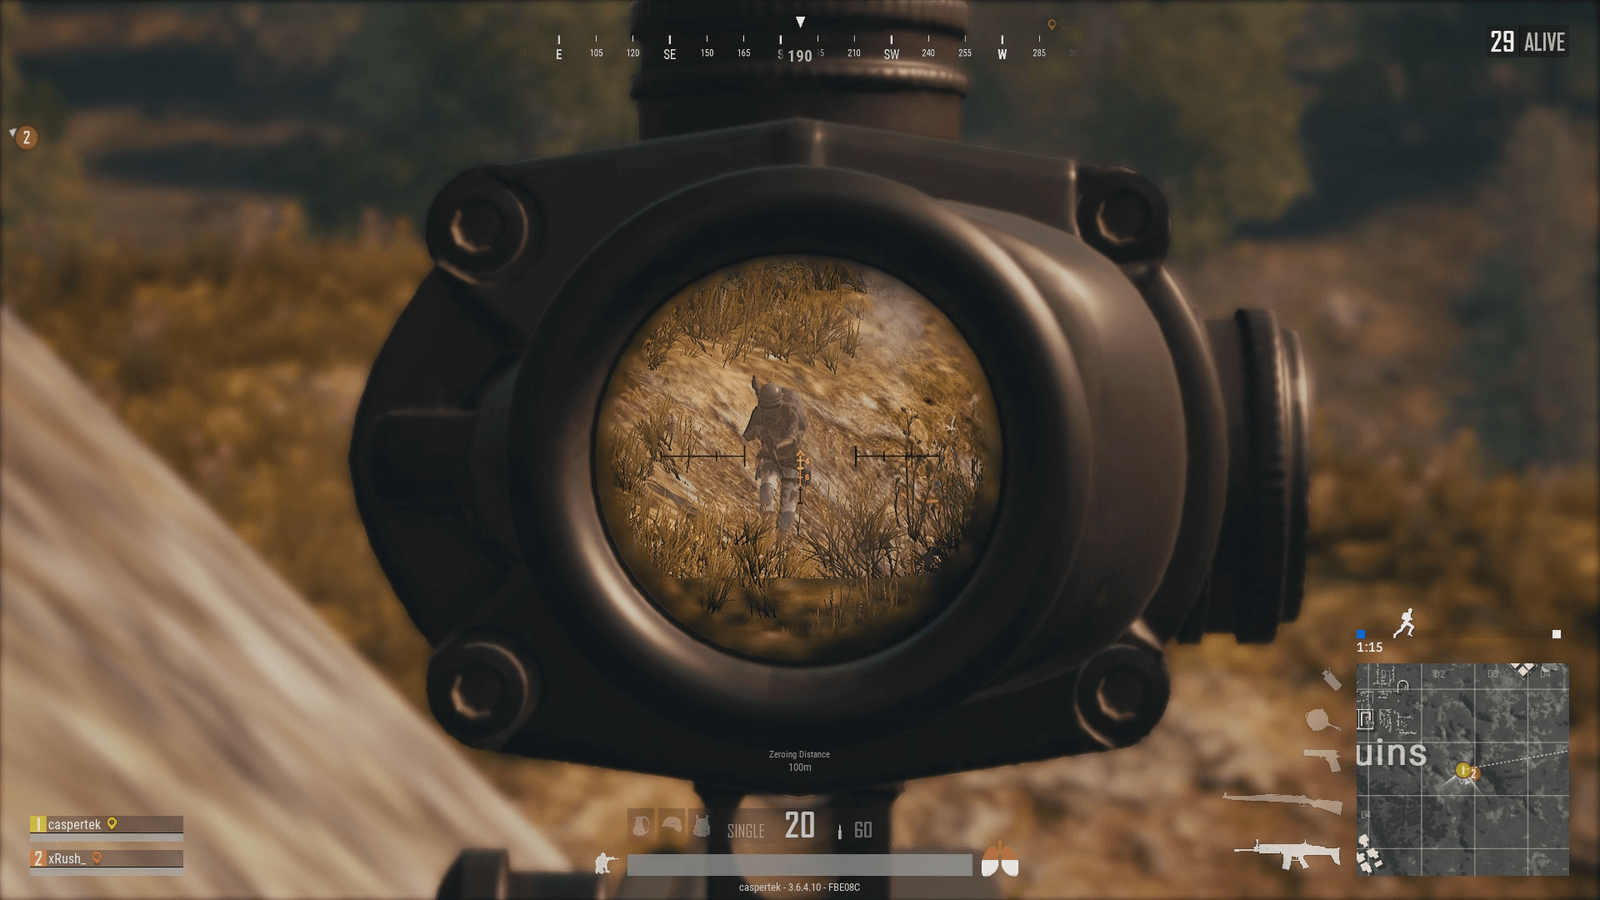 tips to help you get better at PlayerUnkown's Battlegrounds